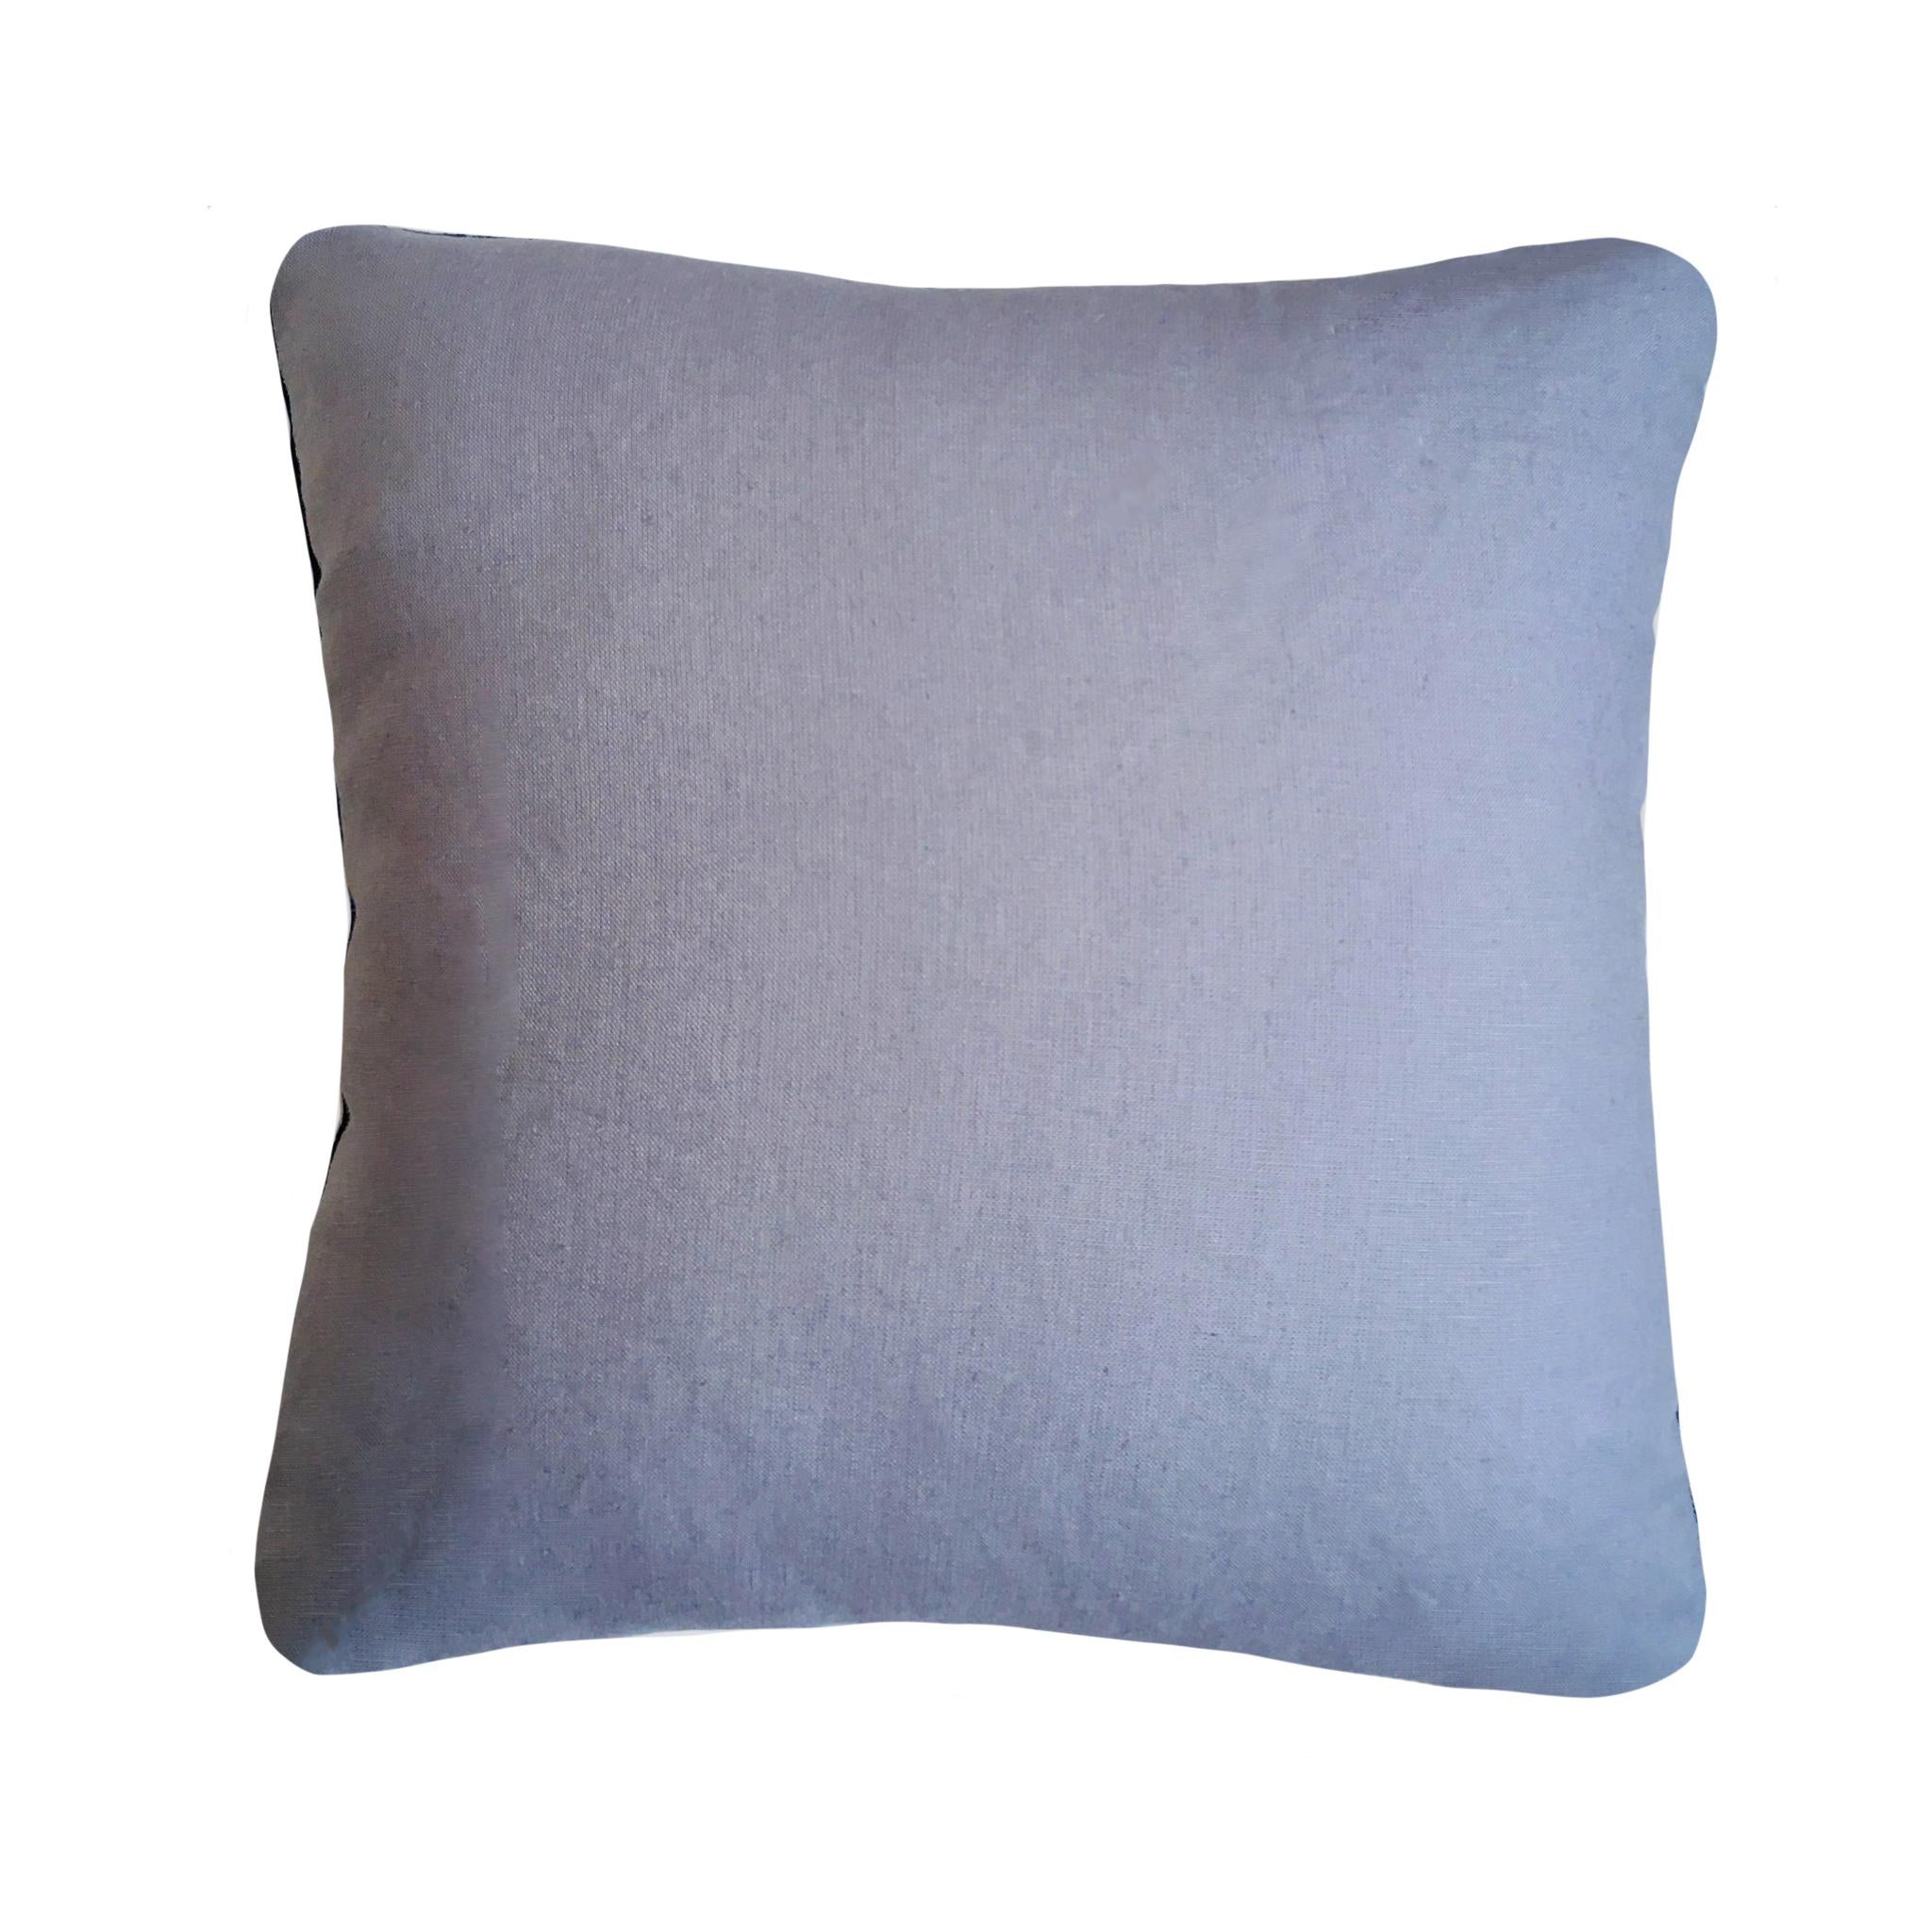 Rose velvet cushion dyed with indigo in Halo pattern with grey linen backing. Hand-dyed and sewn in New York City, down pillow insert made locally in NYC. Pillow measures 18 x 18 inches. Each velvet cushion is hand made and one of a kind.

Custom